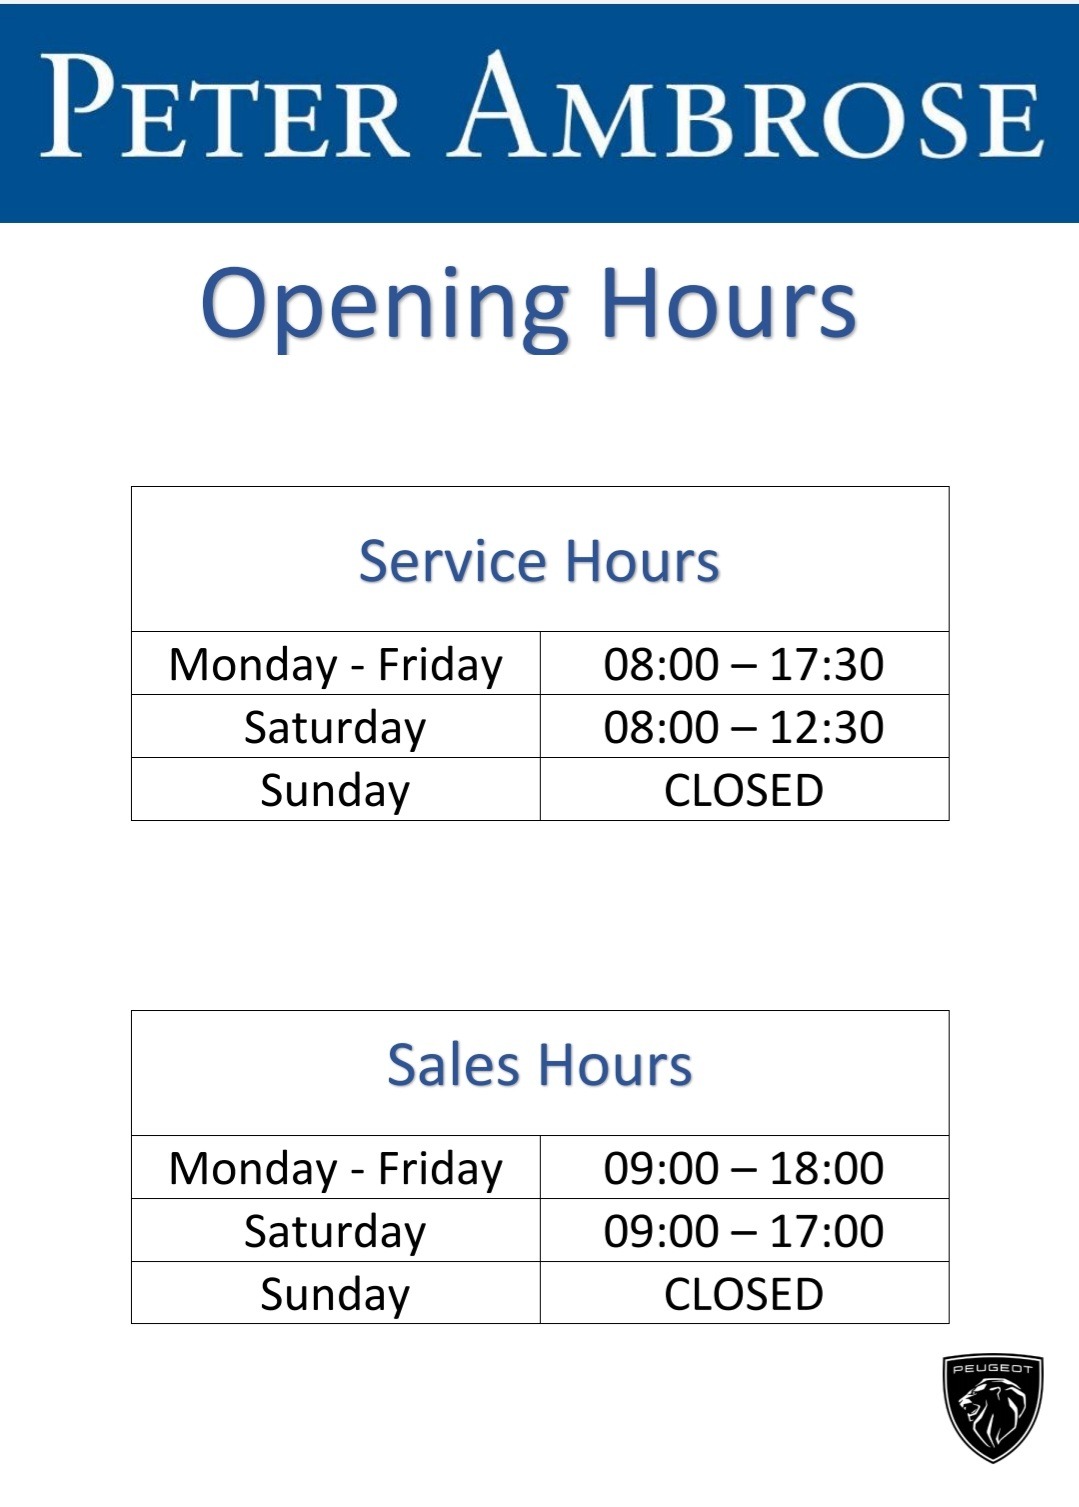 A change to our opening hours